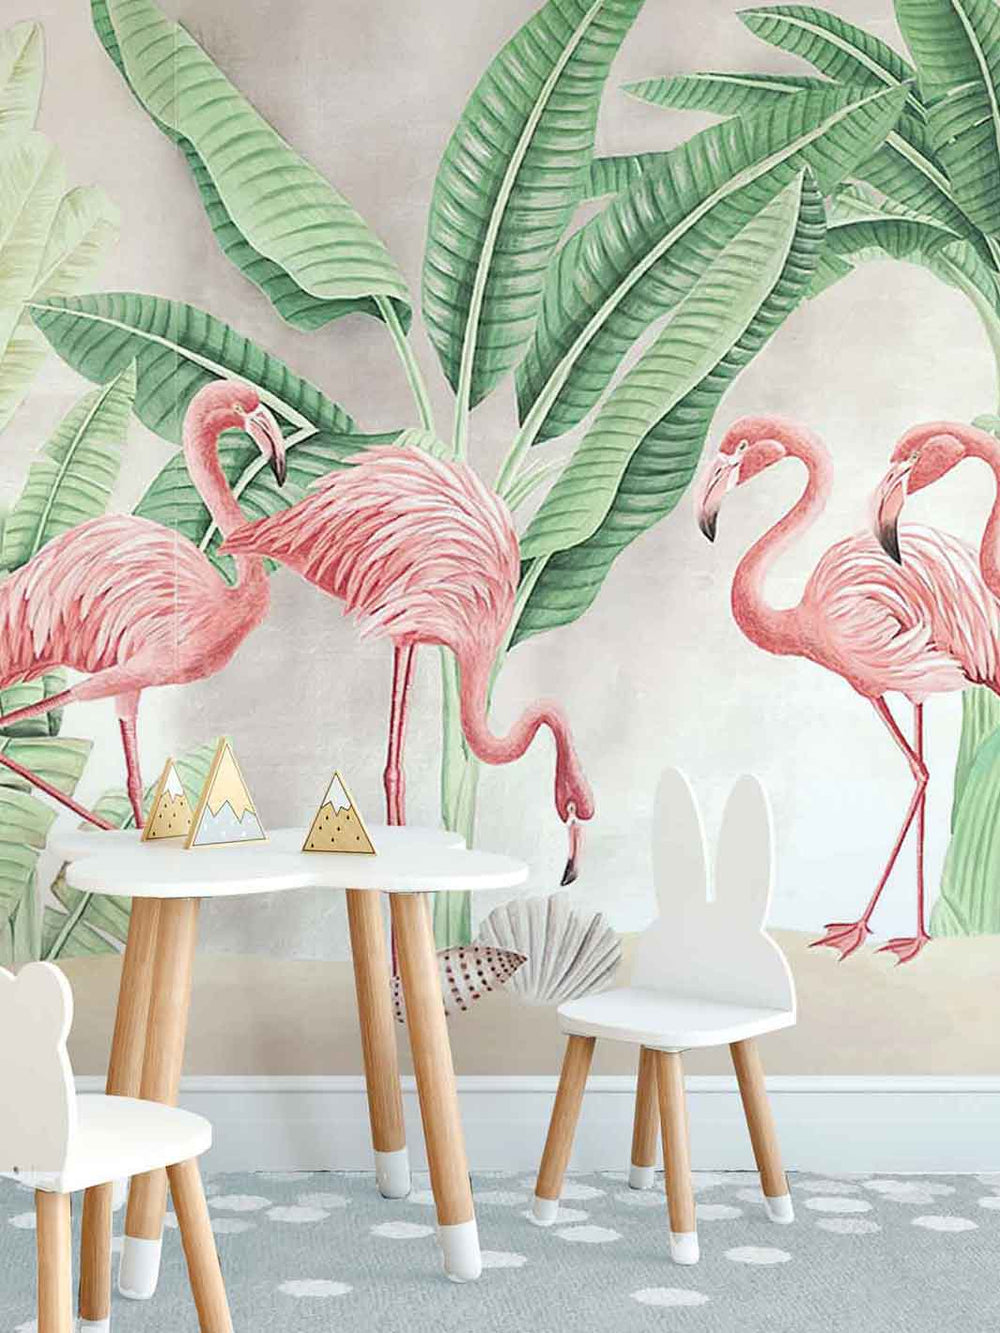 Aqualille Mingo wallpaper in a playroom